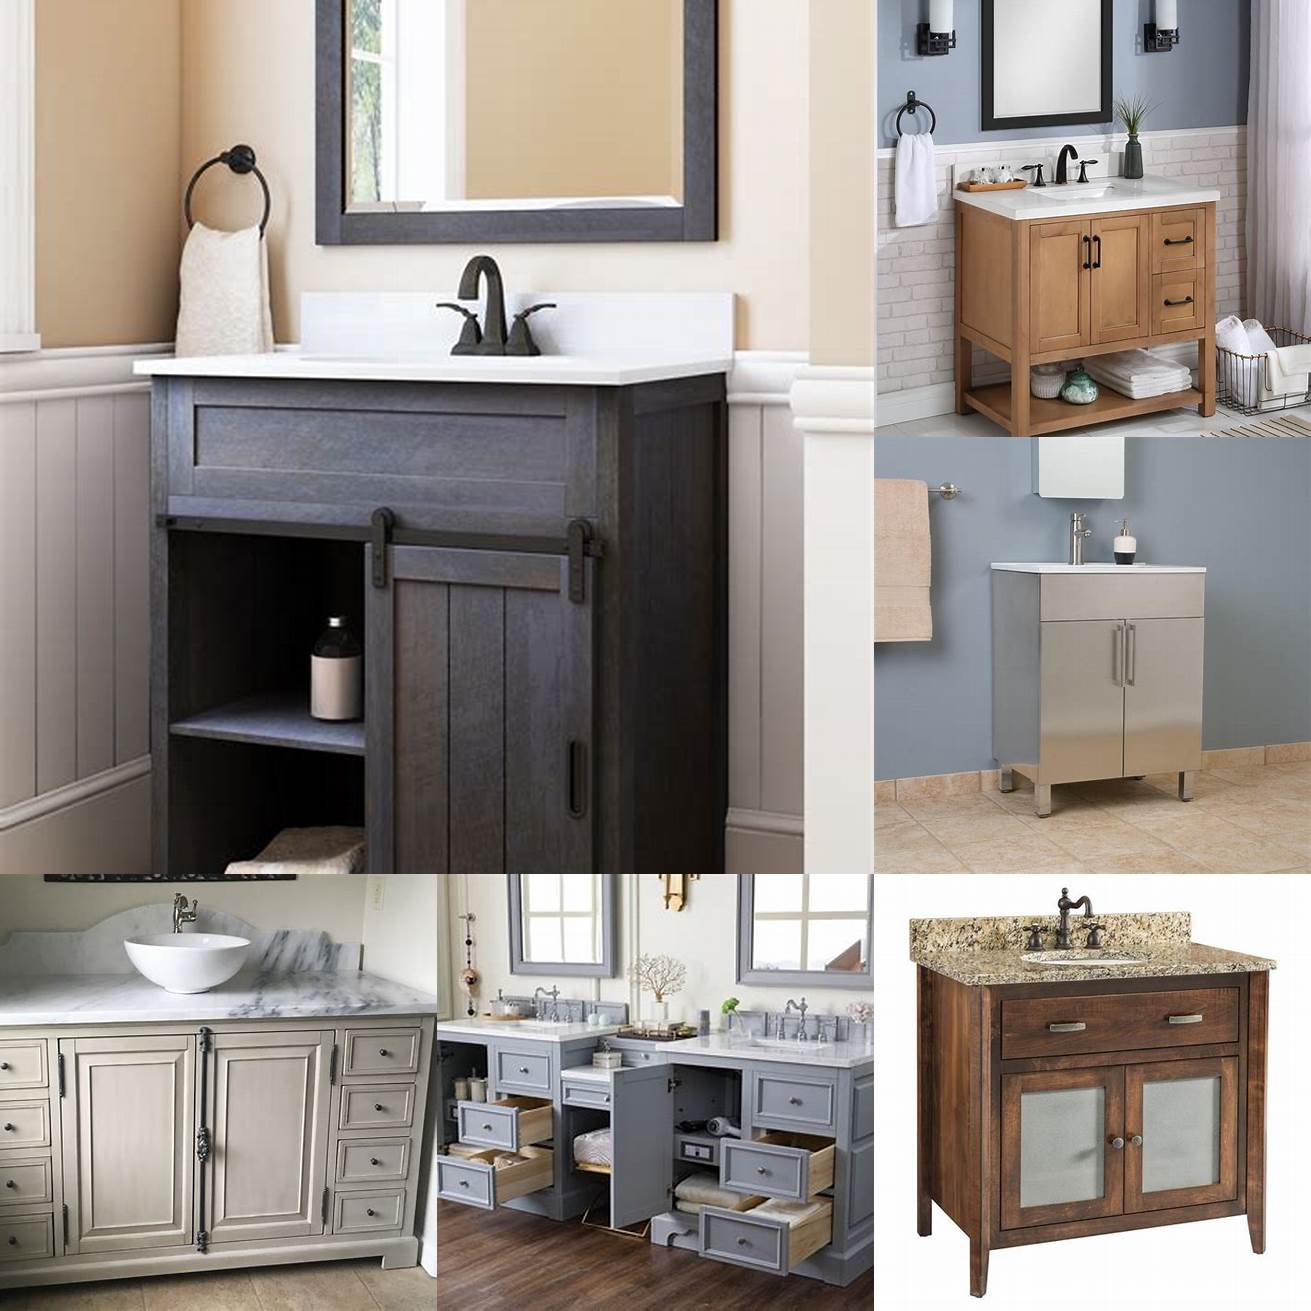 3 Limited customization While metal vanities come in different shapes and sizes they may not offer as many customization options as other materials such as wood or stone